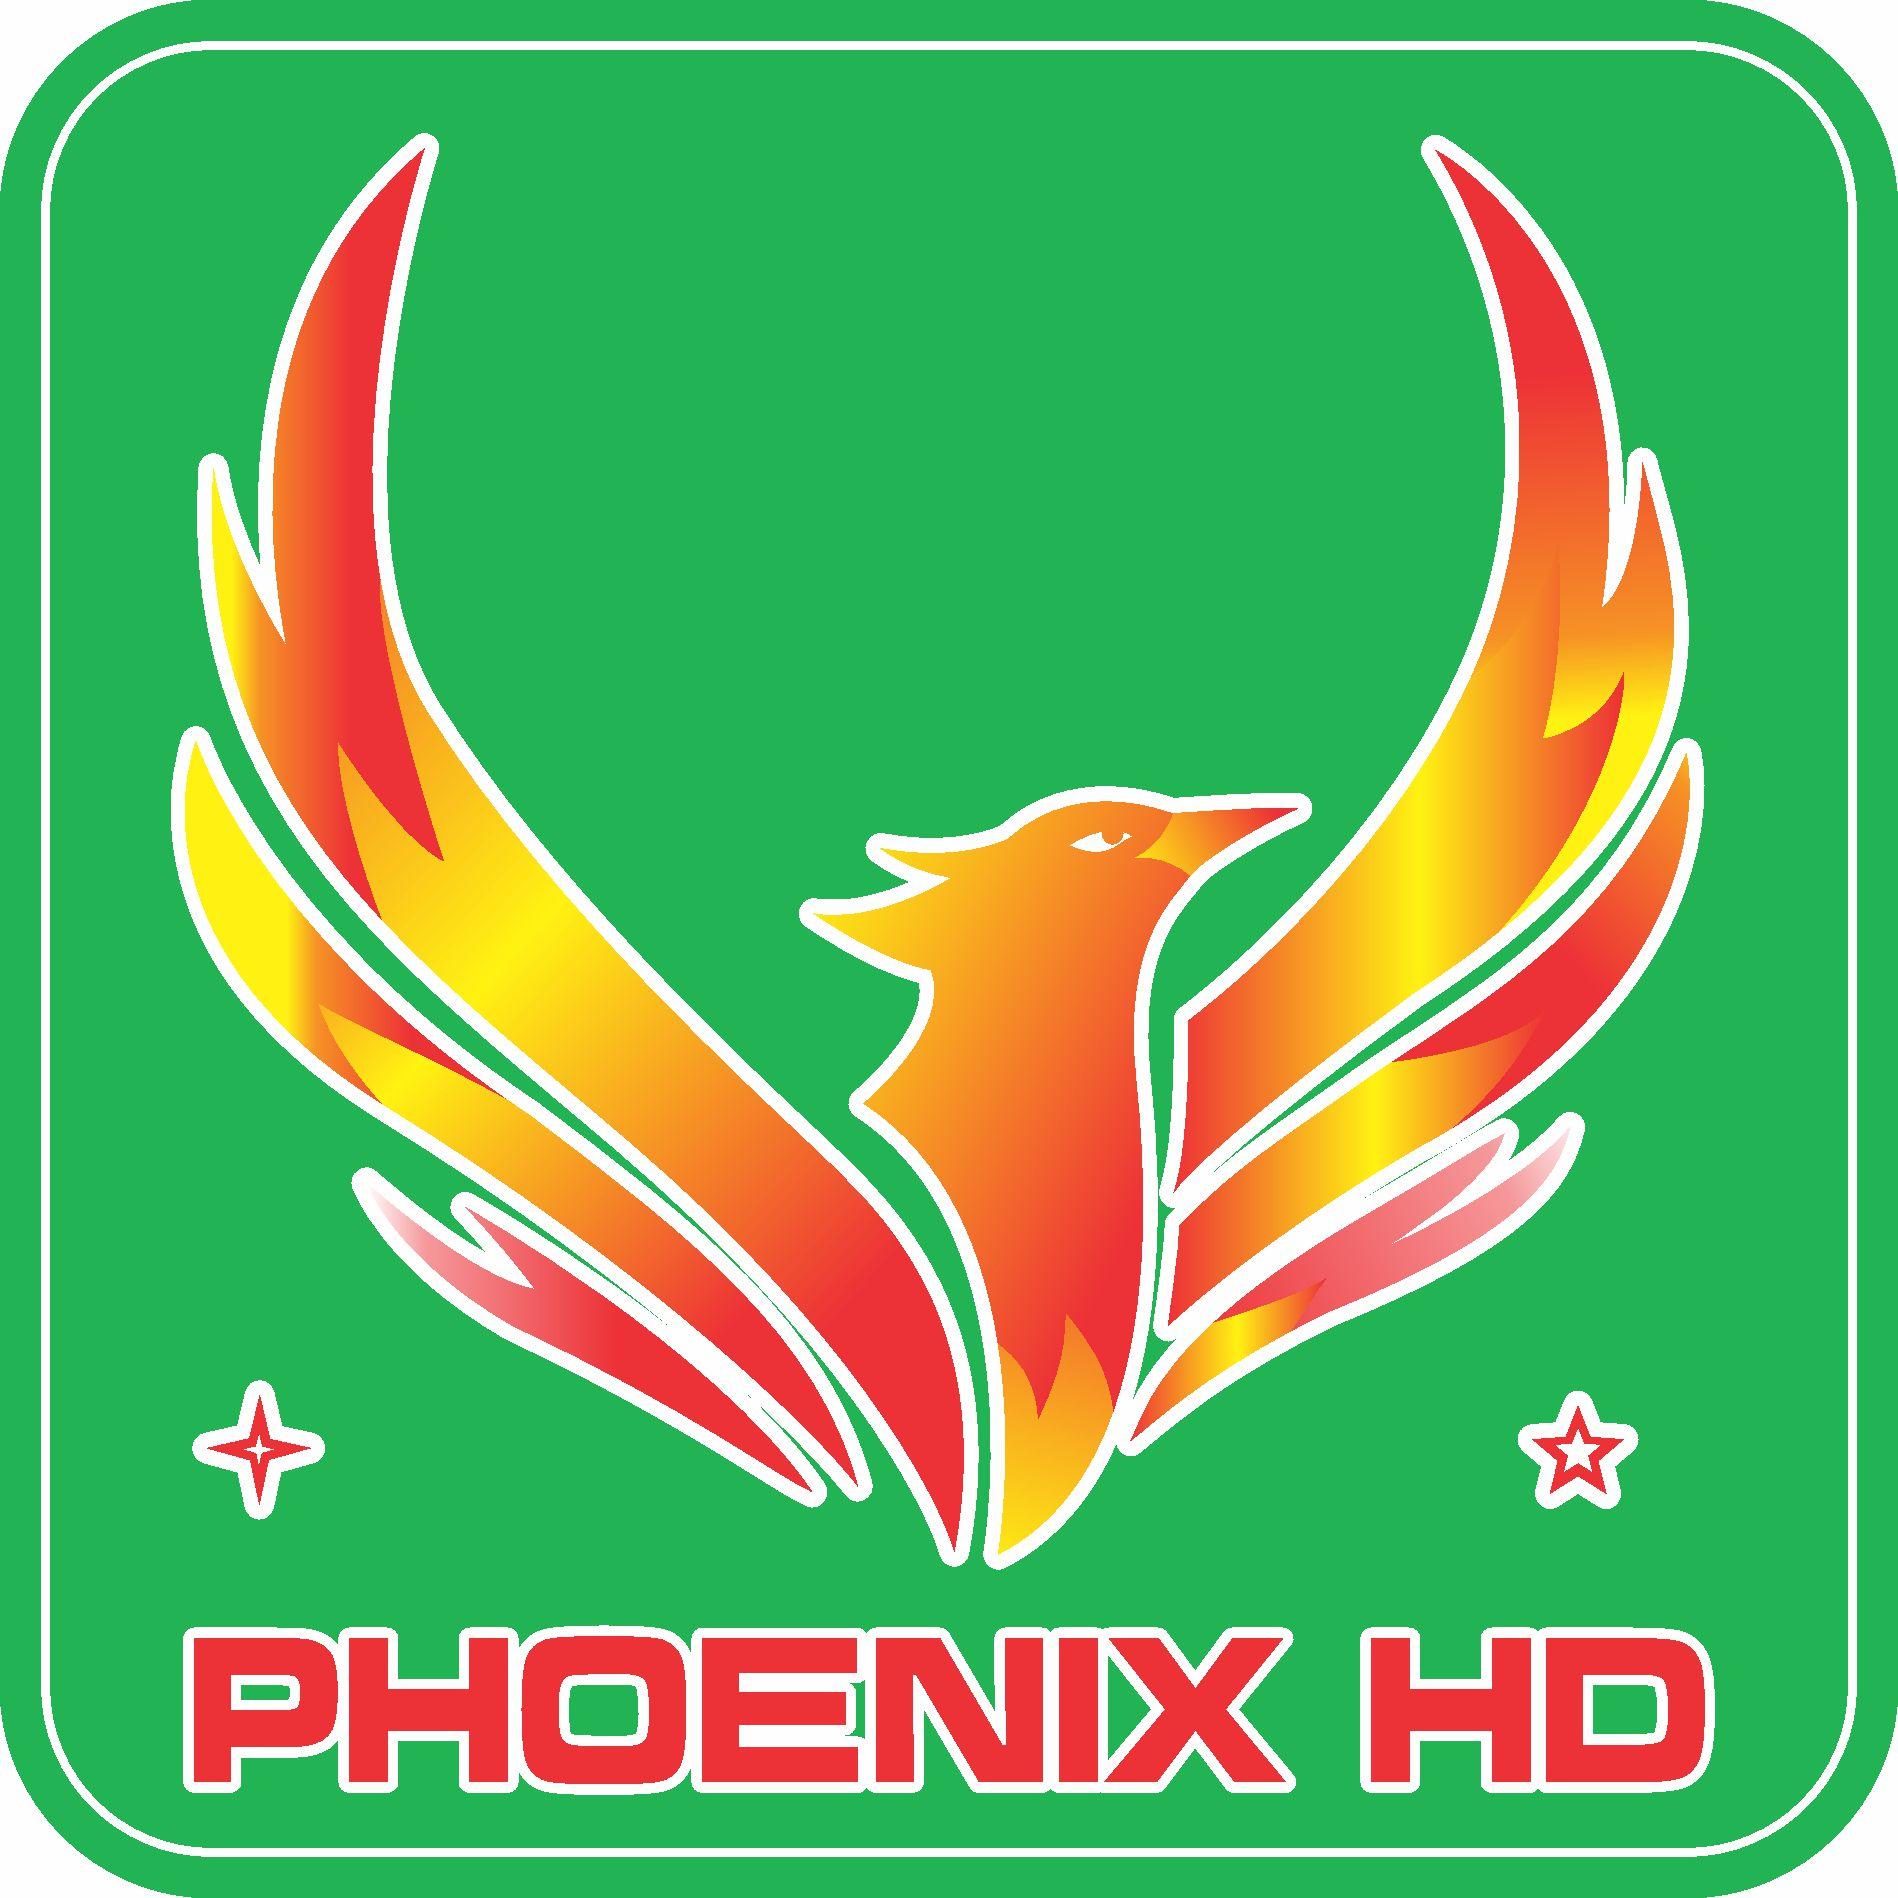 Phoenix - Construction, Trade and Service Cooperative